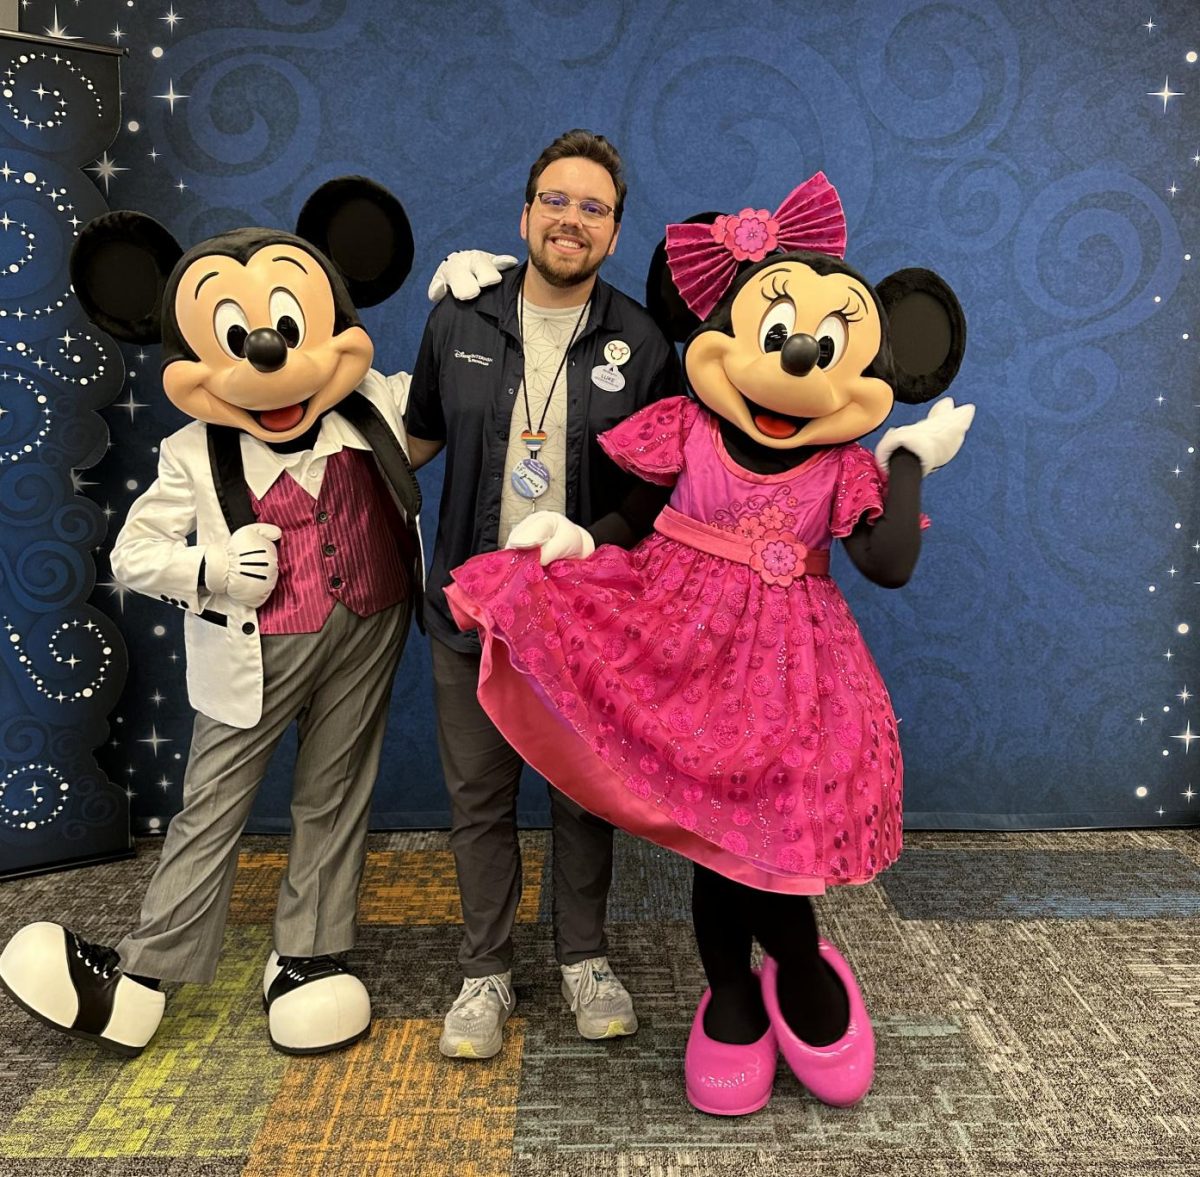 POSE — Tschumperlin poses with two of his favorite Disney characters.